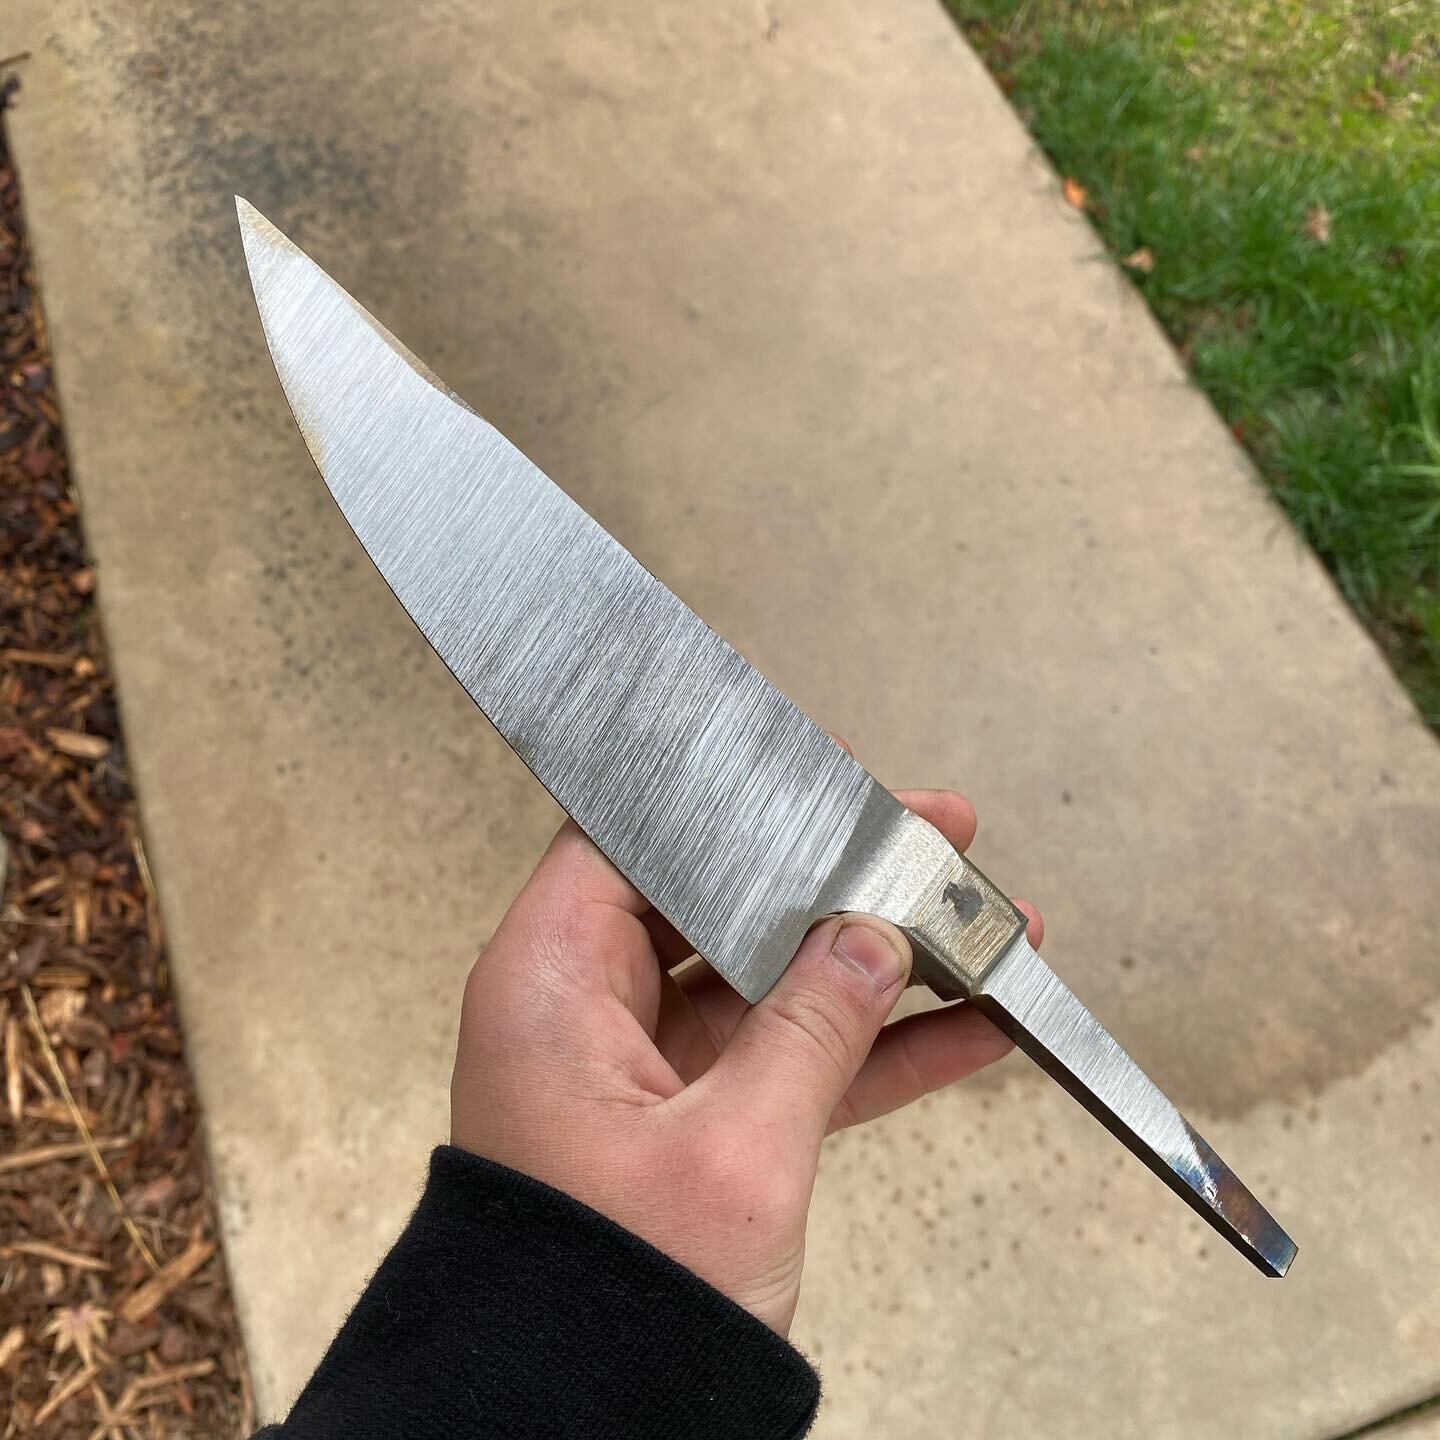 Alright here is the integral from the live stream in a VERY rough ground state. If you didn&rsquo;t watch the live you can see how I made this on my last post. 

#knife #chef #steel #forged #integral #handmade